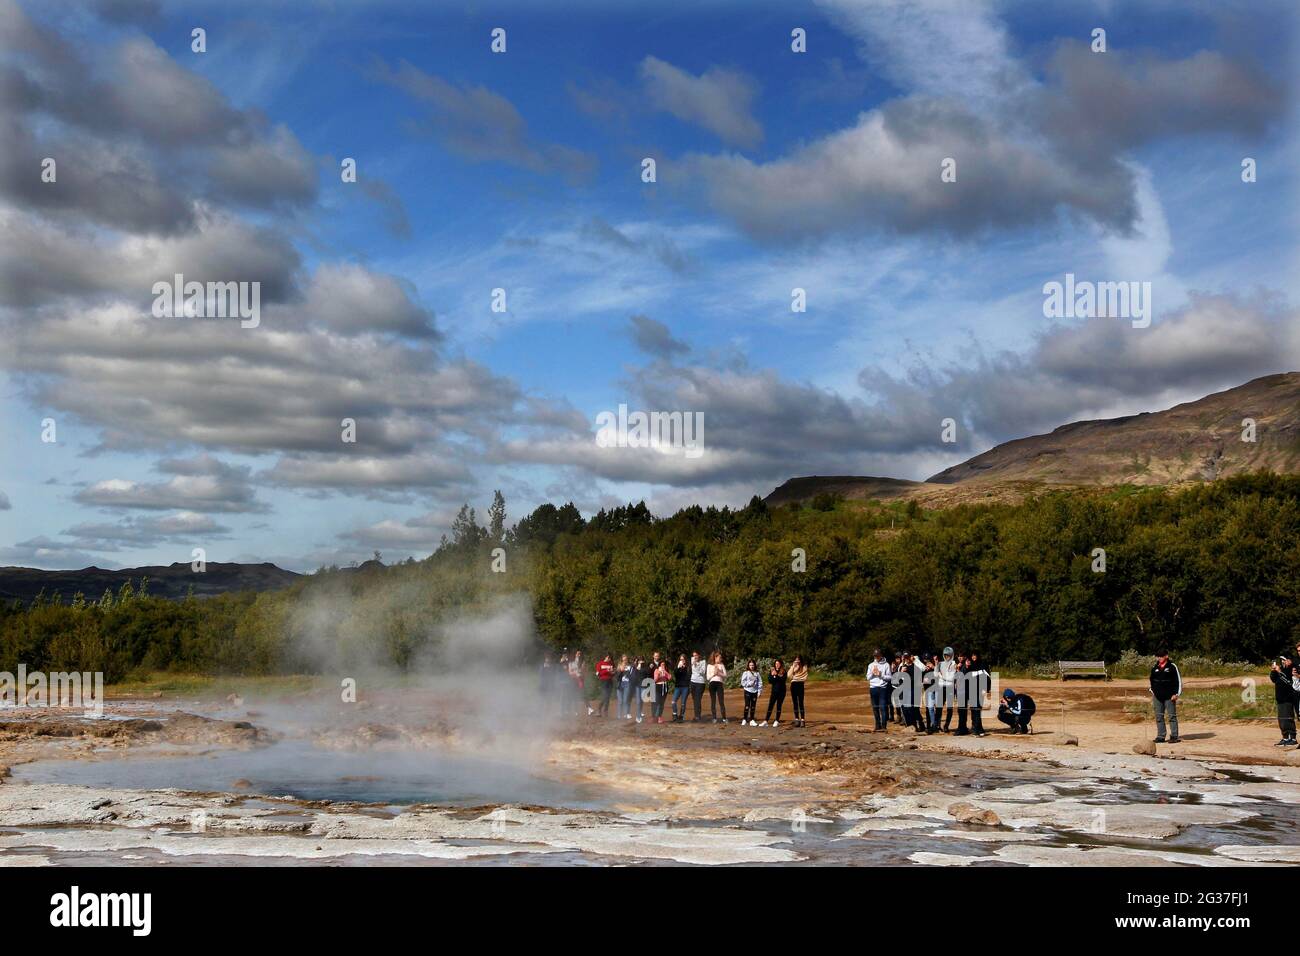 Geyser, hot spring, Strokkur, tourists, spectators, Haukadalur, geothermal area, Golden Circle, South West Iceland, Iceland Stock Photo